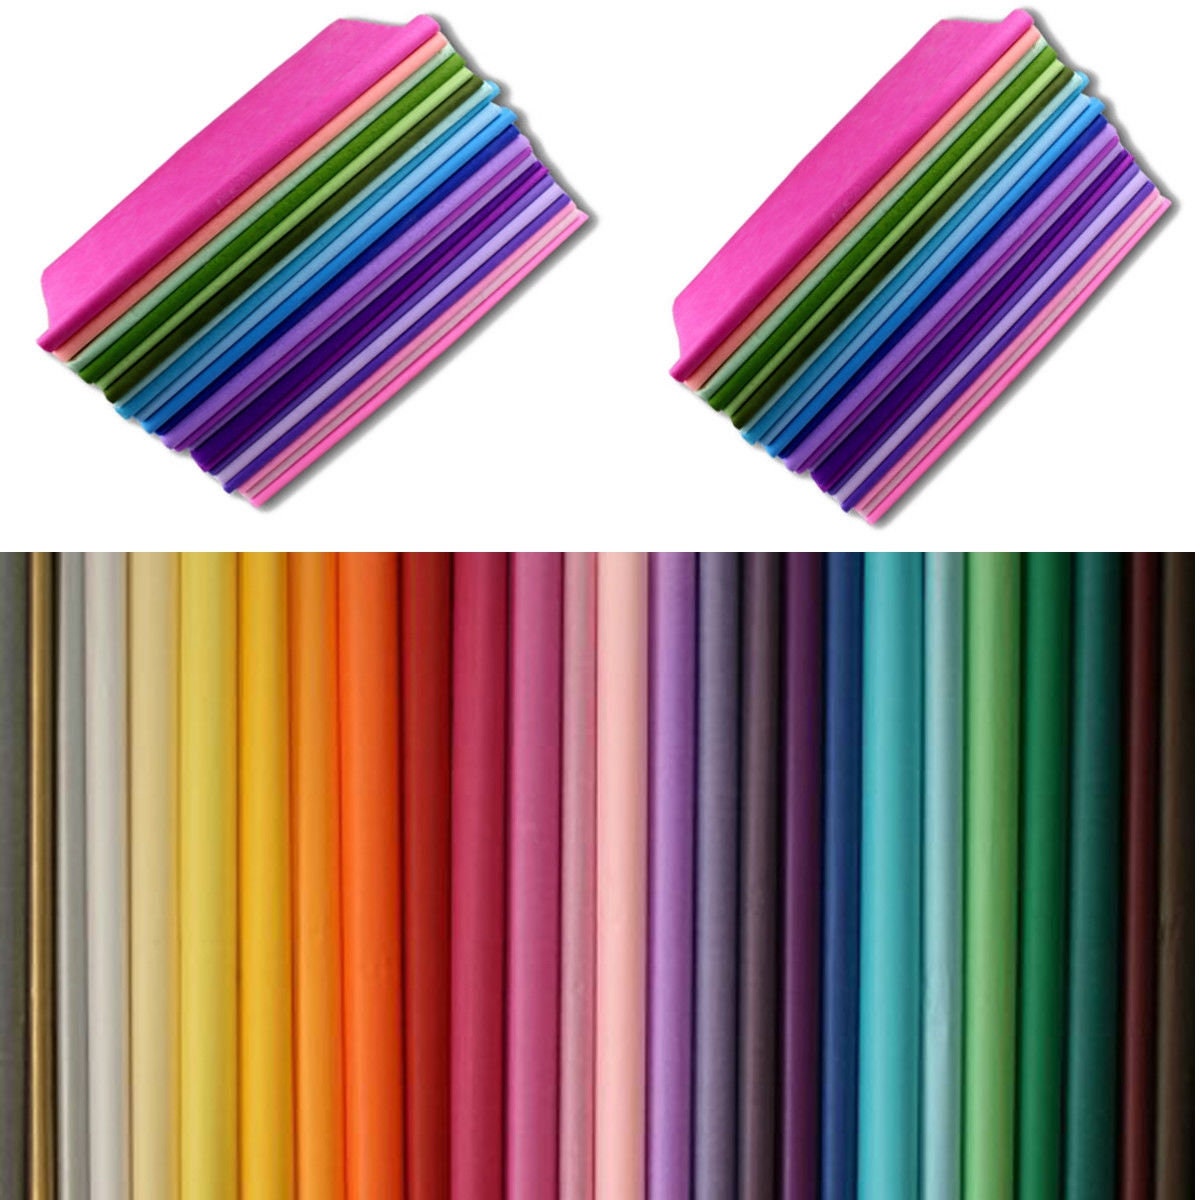 Large Tissue Paper Sheets Pre Packed 20 Assorted Colours Acid Free Gift  Wrap Sheet Packaging 